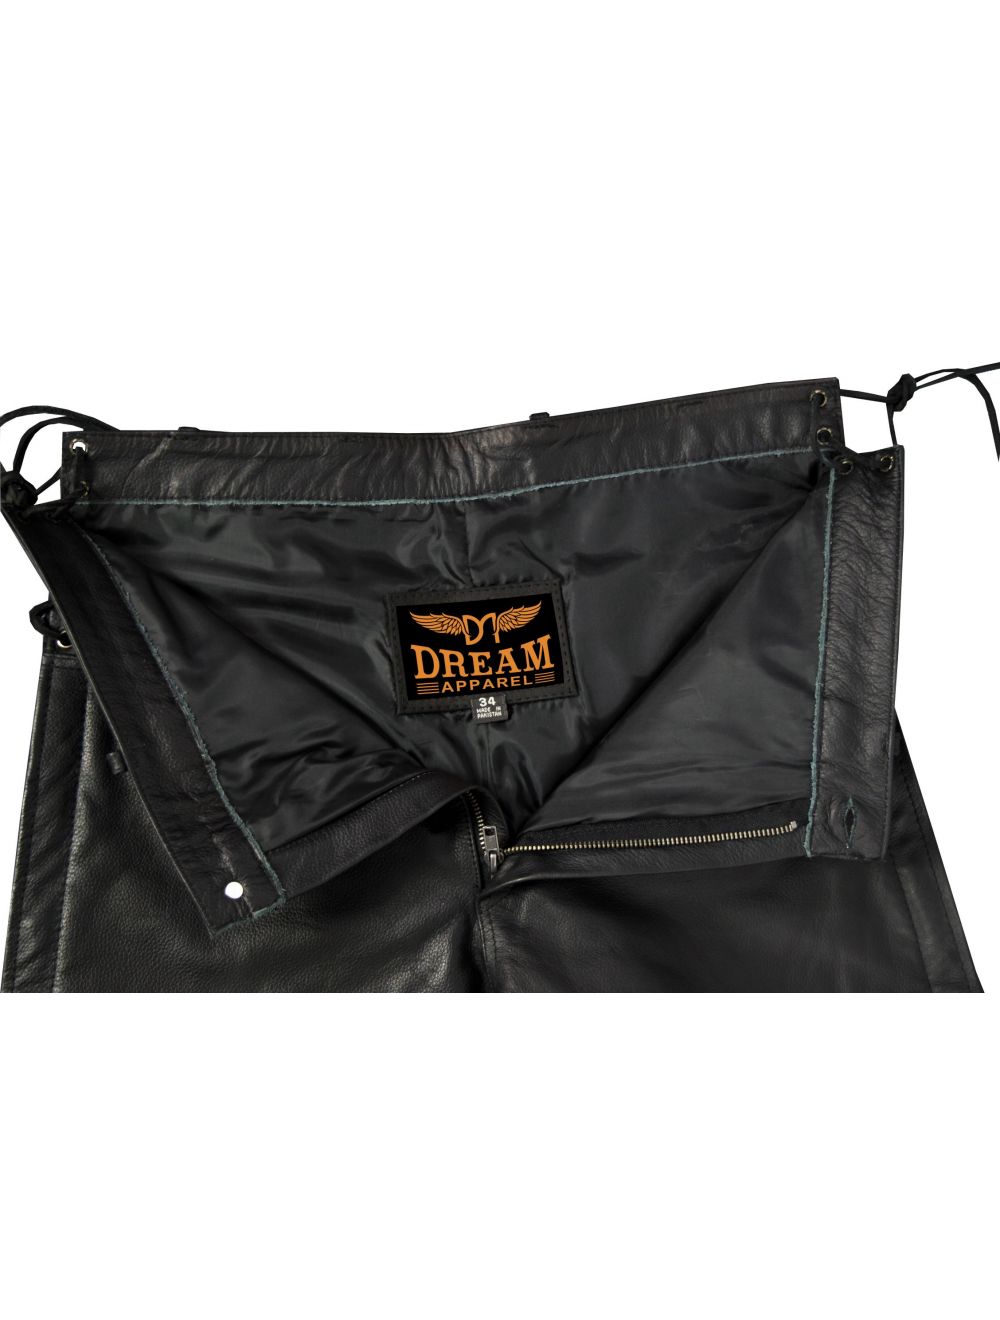 Men's Leather Chaps With Side Laces